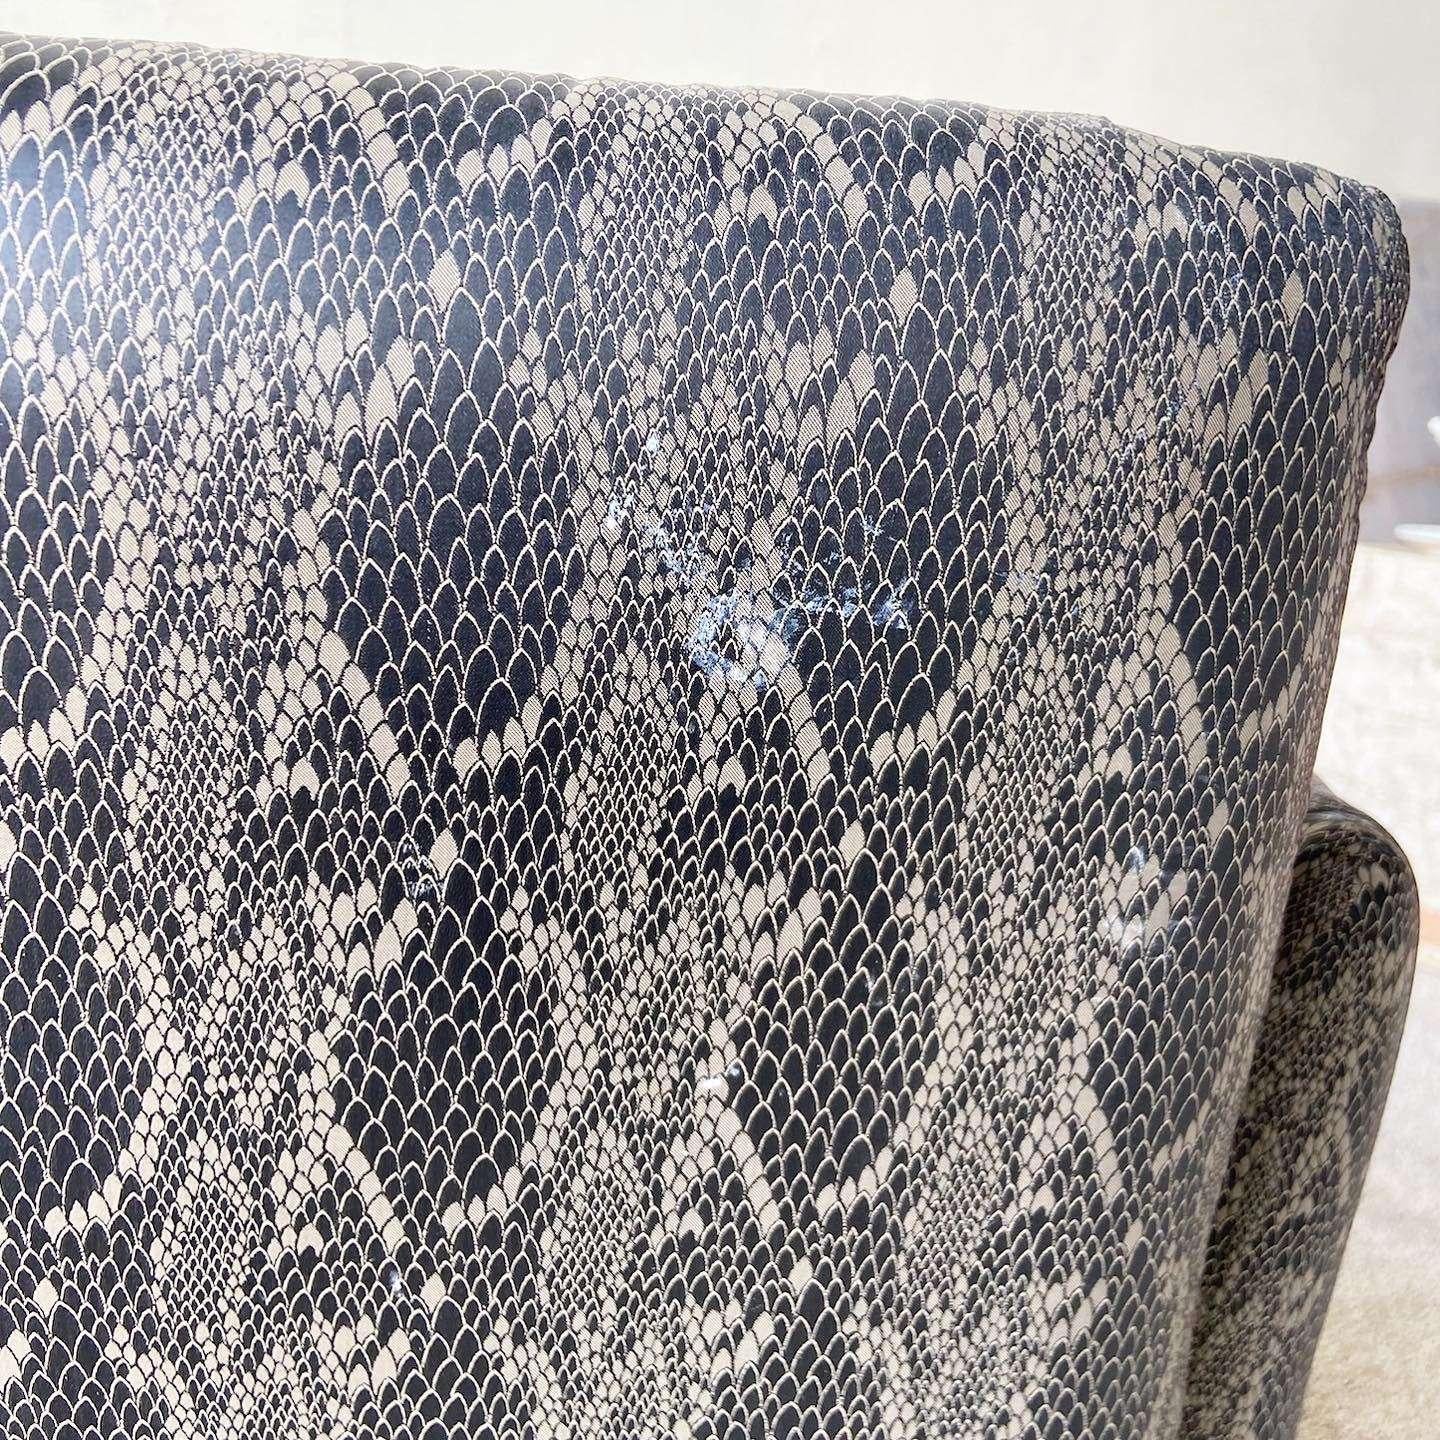 Late 20th Century Postmodern Faux Snake Skin Upholstered Chiclet Arm Chairs on Wheels - a Pair